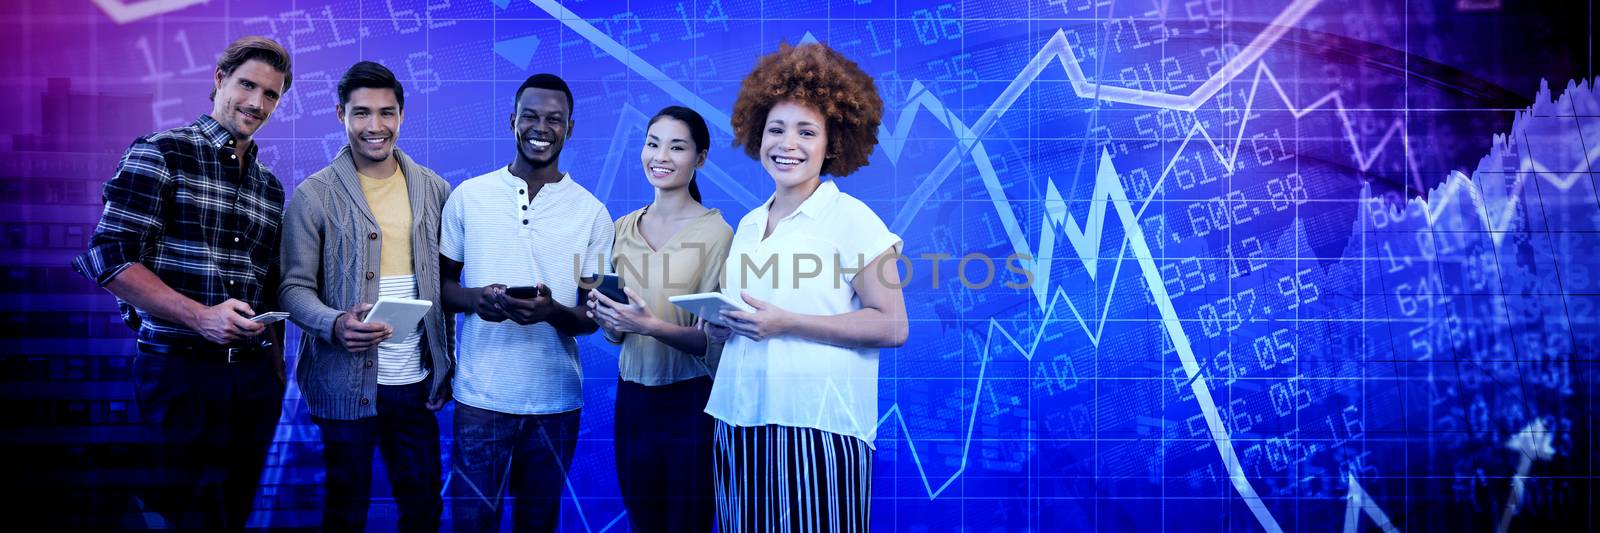 Composite image of portrait of smiling business people holding technology by Wavebreakmedia